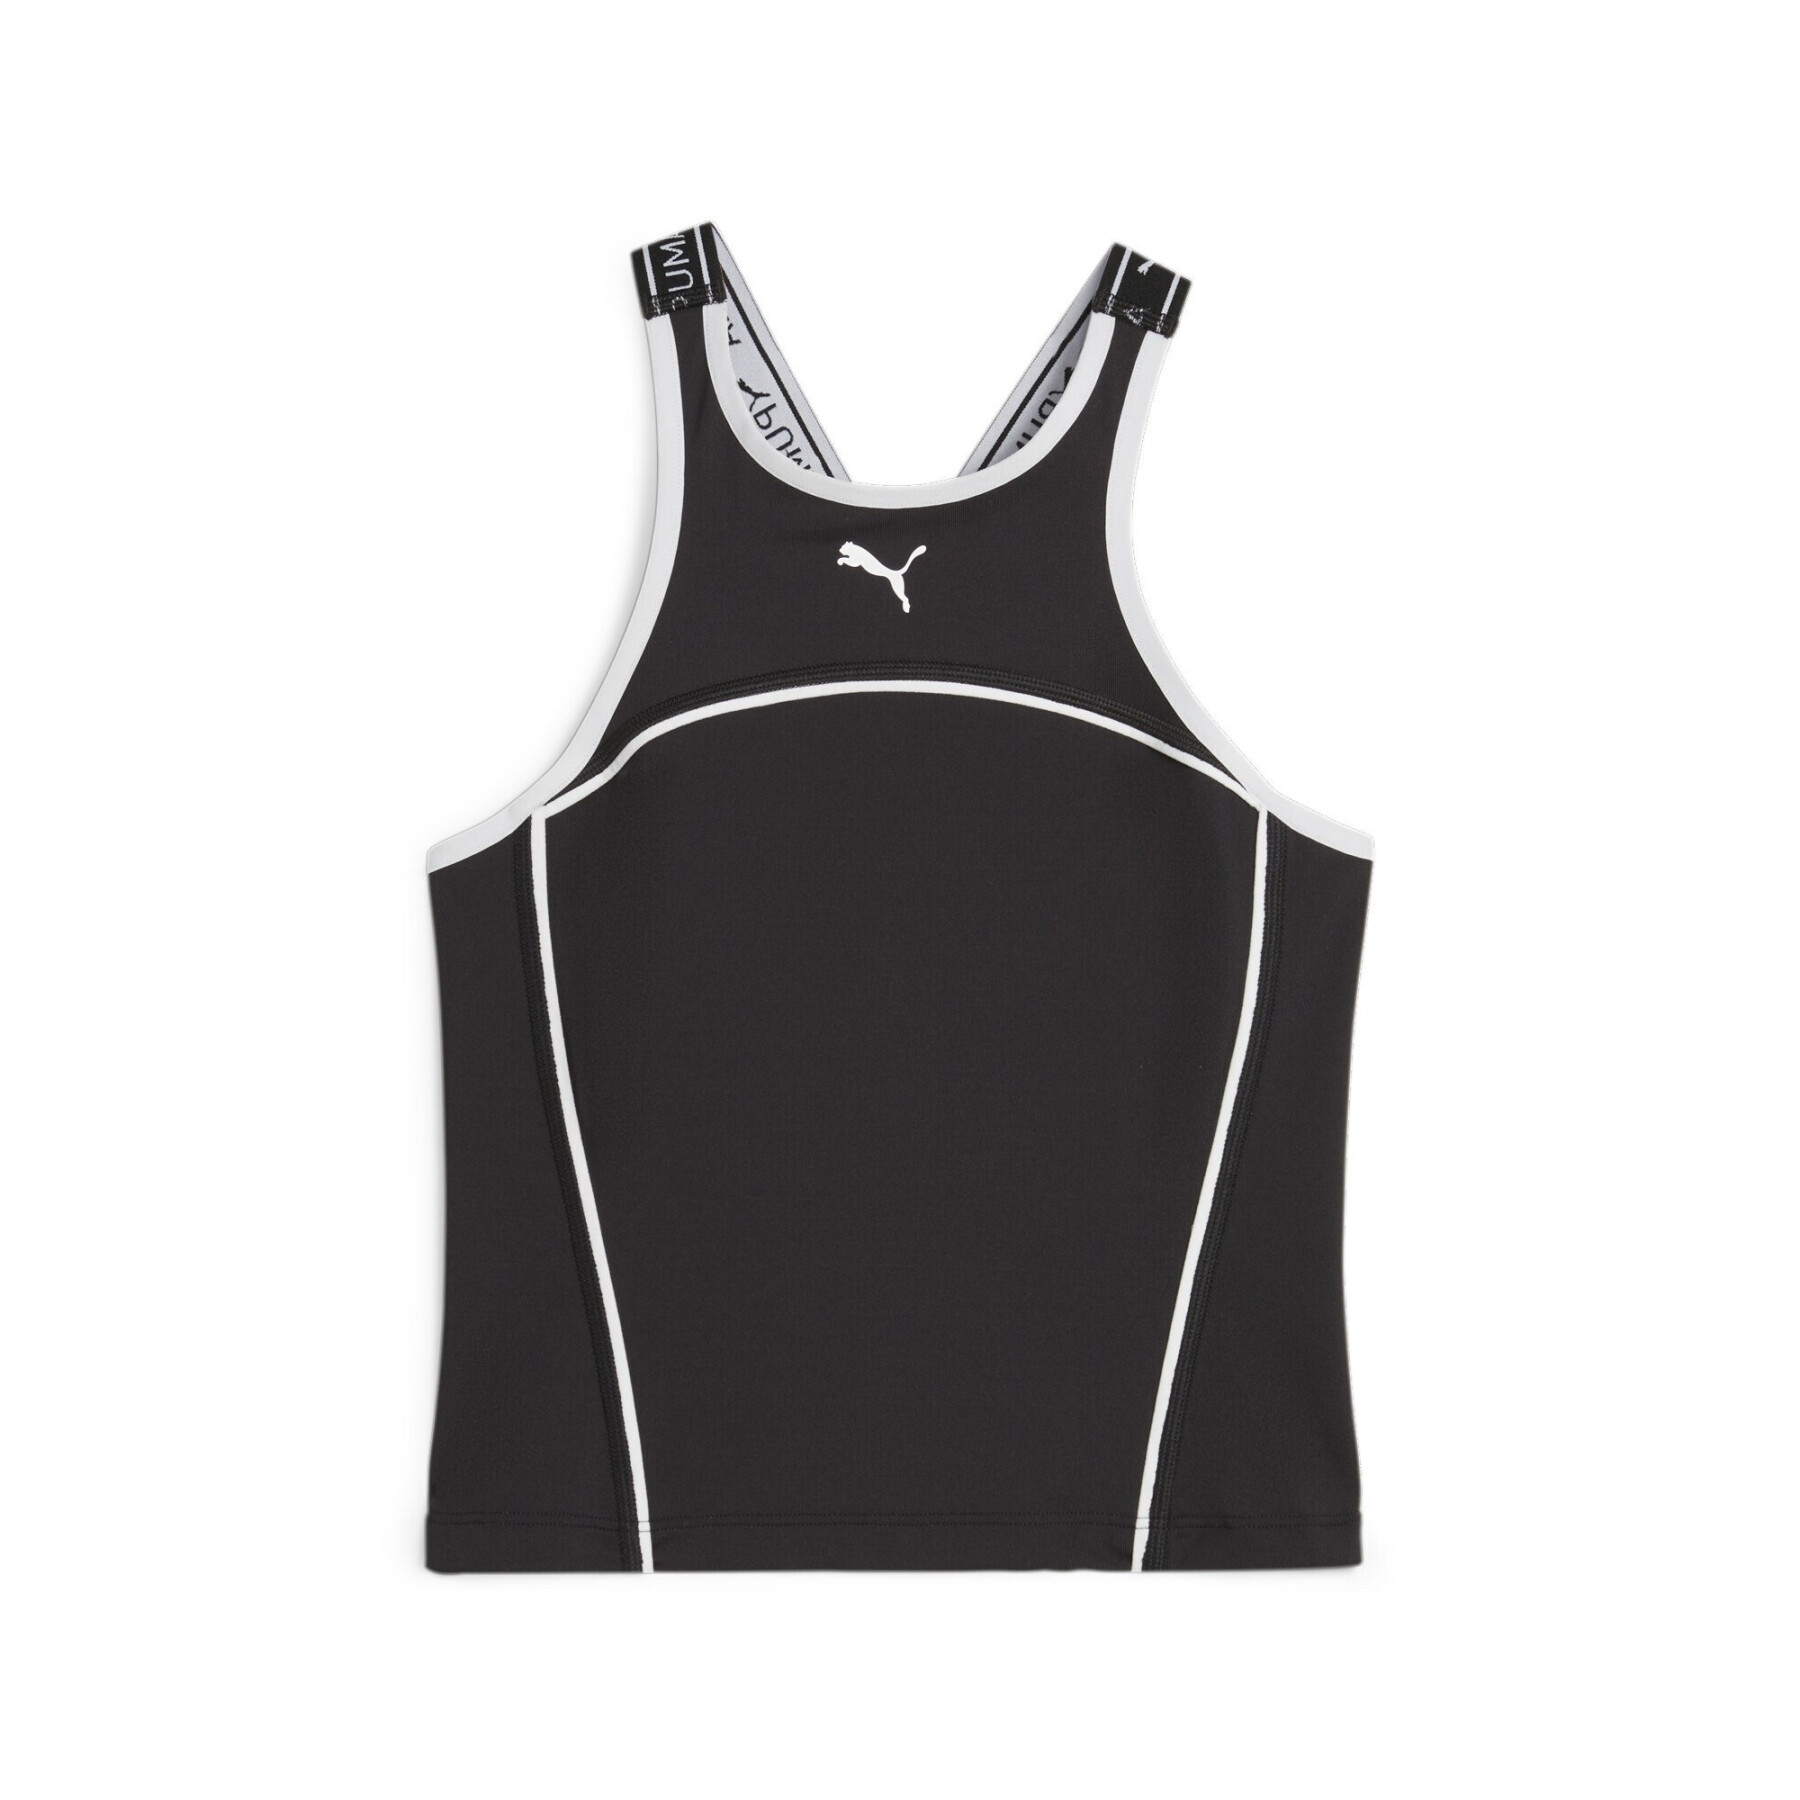 Women's fitted tank top Puma Fit